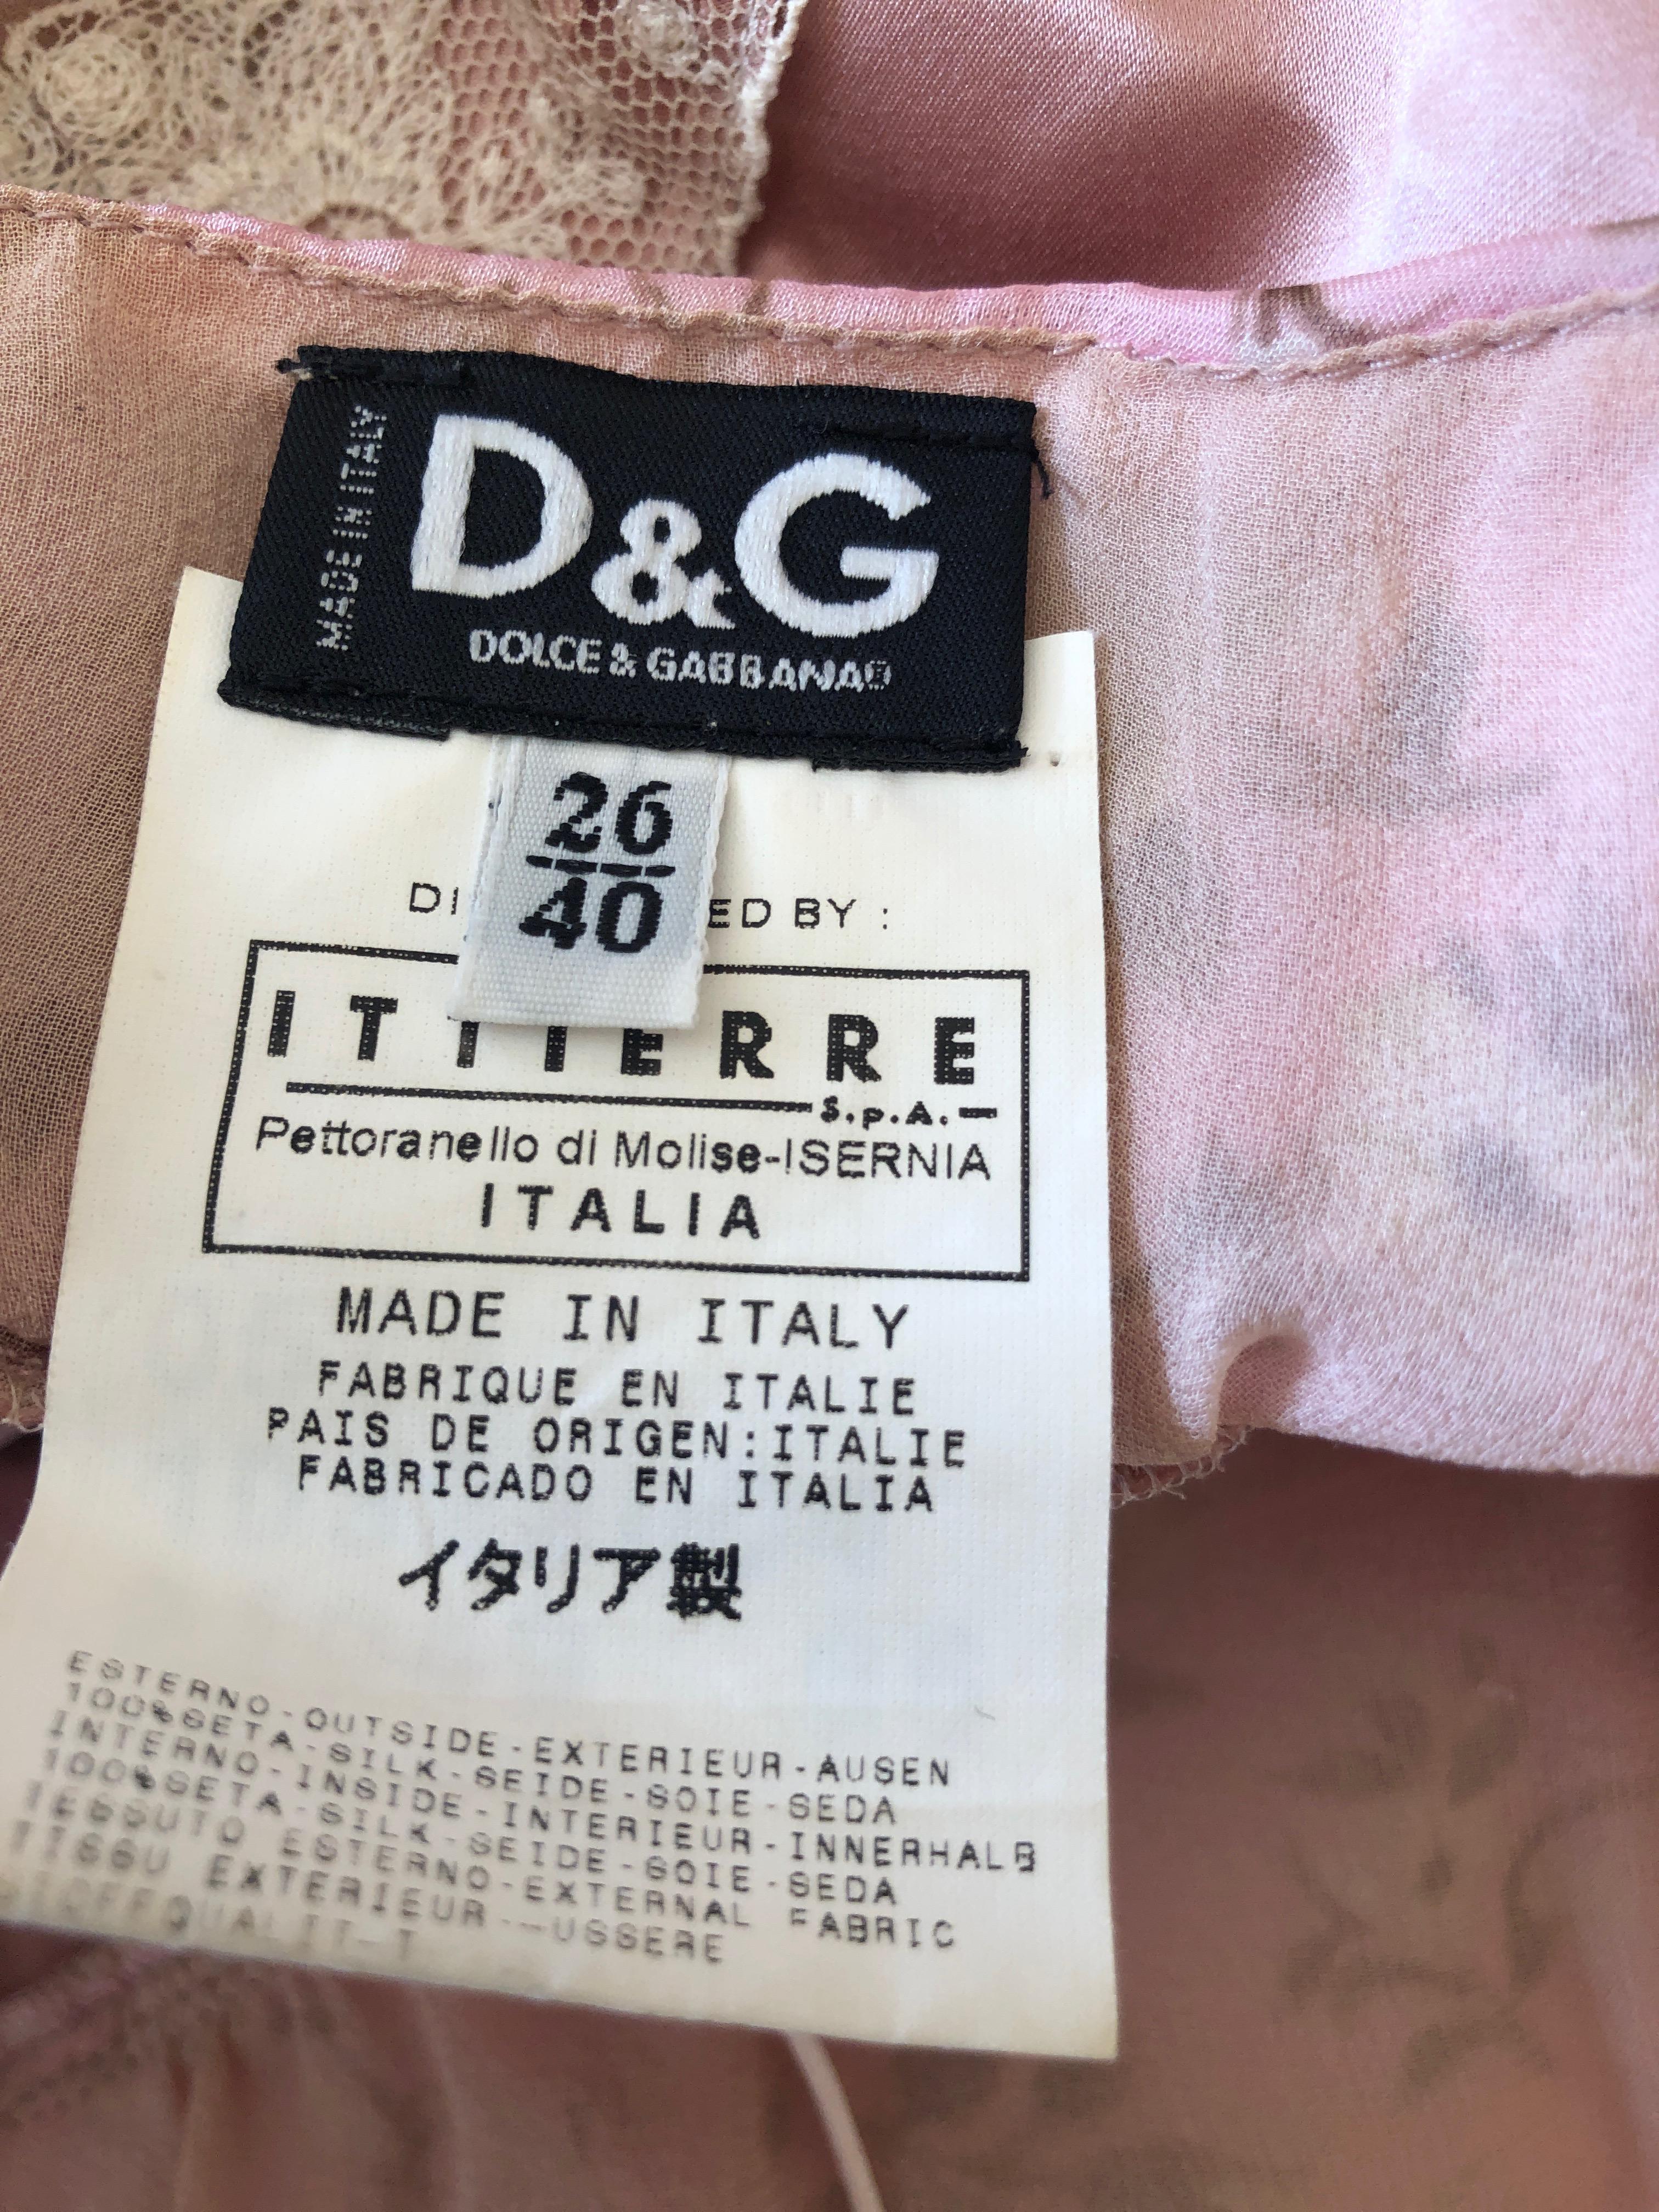 D&G Dolce & Gabbana Romantic Pink Silk Dress with Lace Details For Sale 2